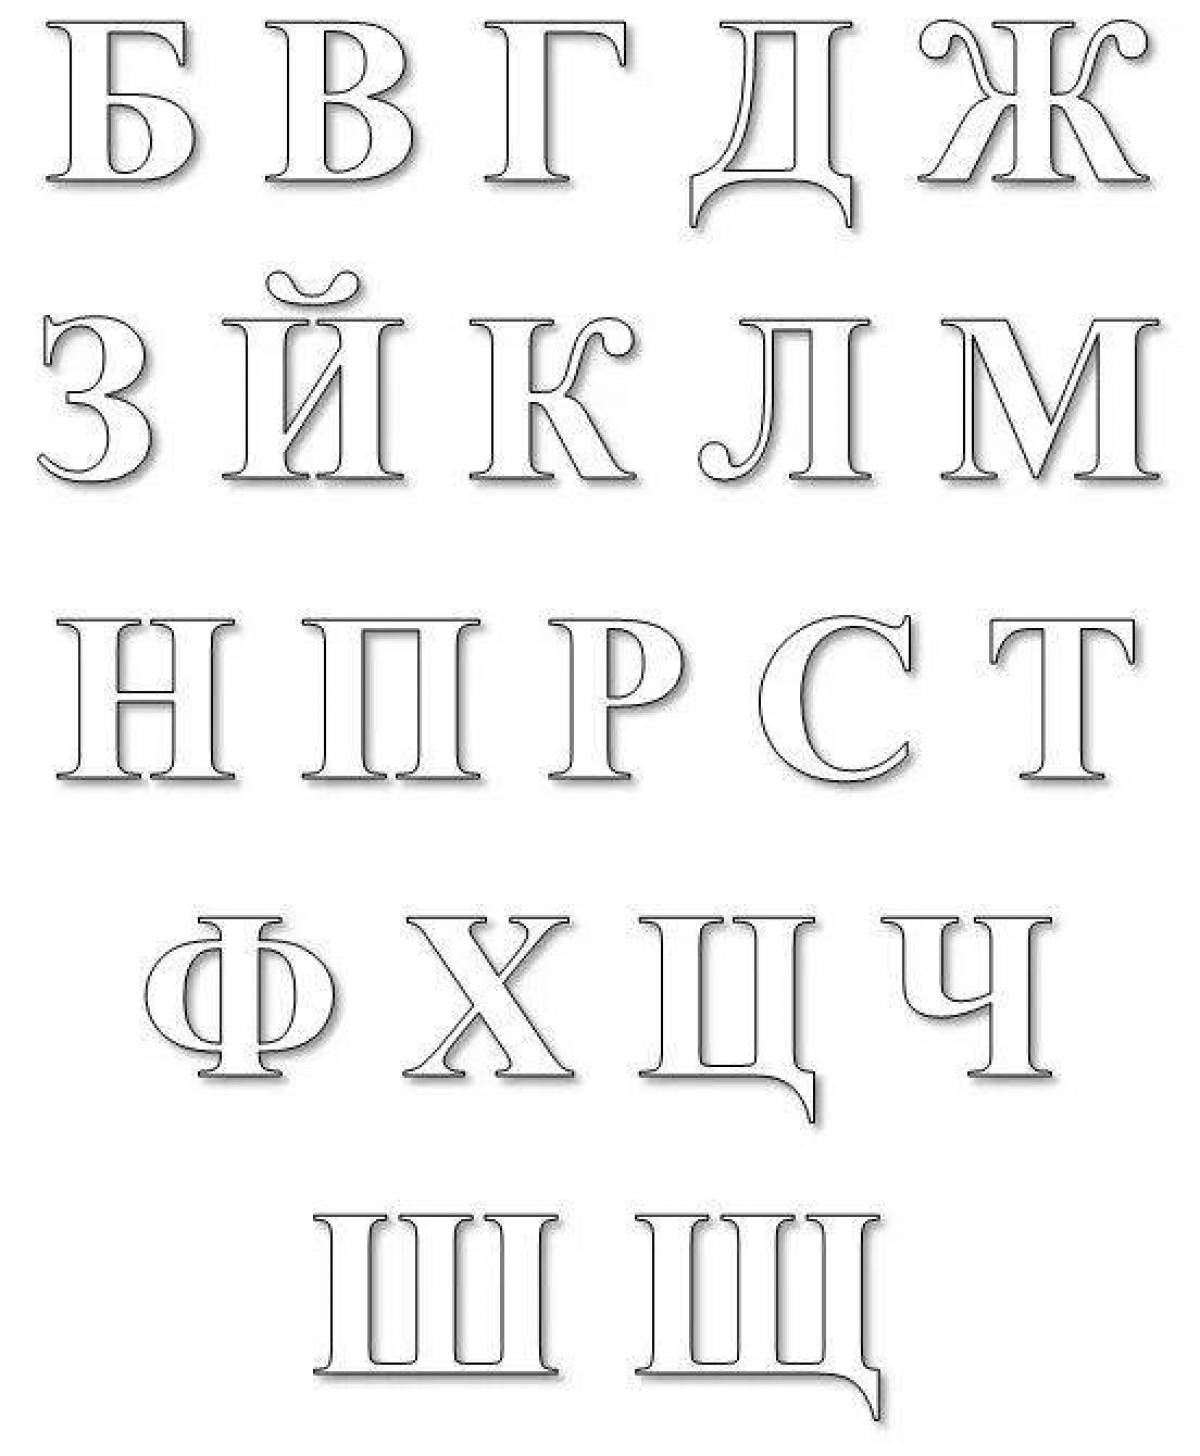 Great coloring with the Russian alphabet